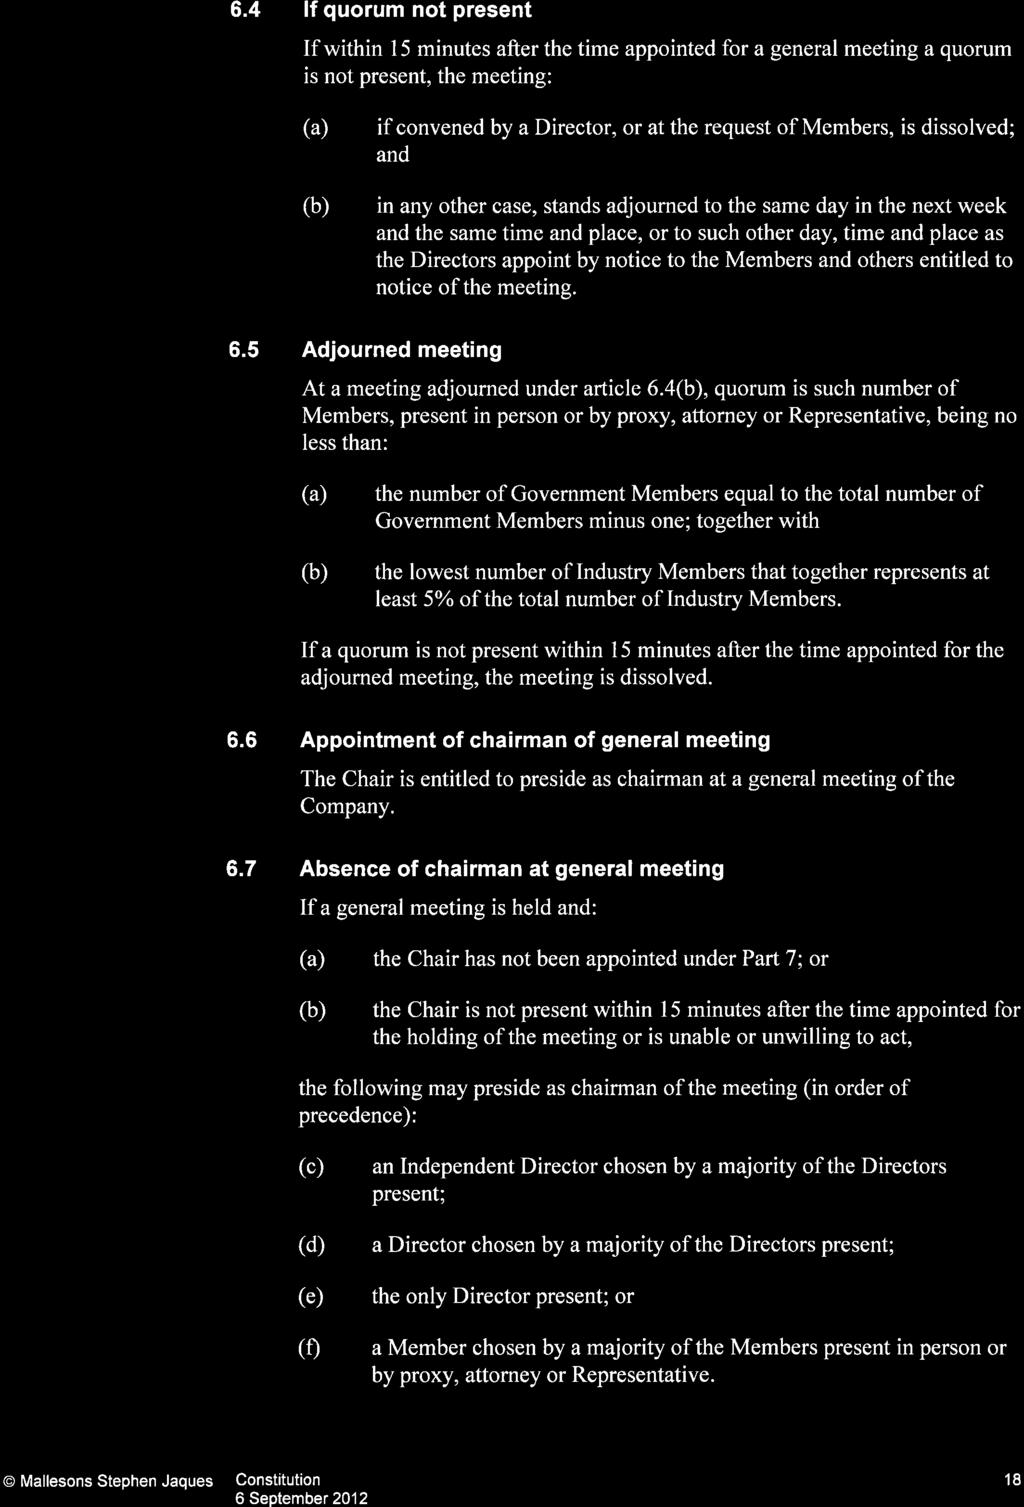 6.4 If quorum not present If within 15 minutes after the time appointed for a general meeting a quorum is not present, the meeting: if convened by a Director, or at the request of Members, is